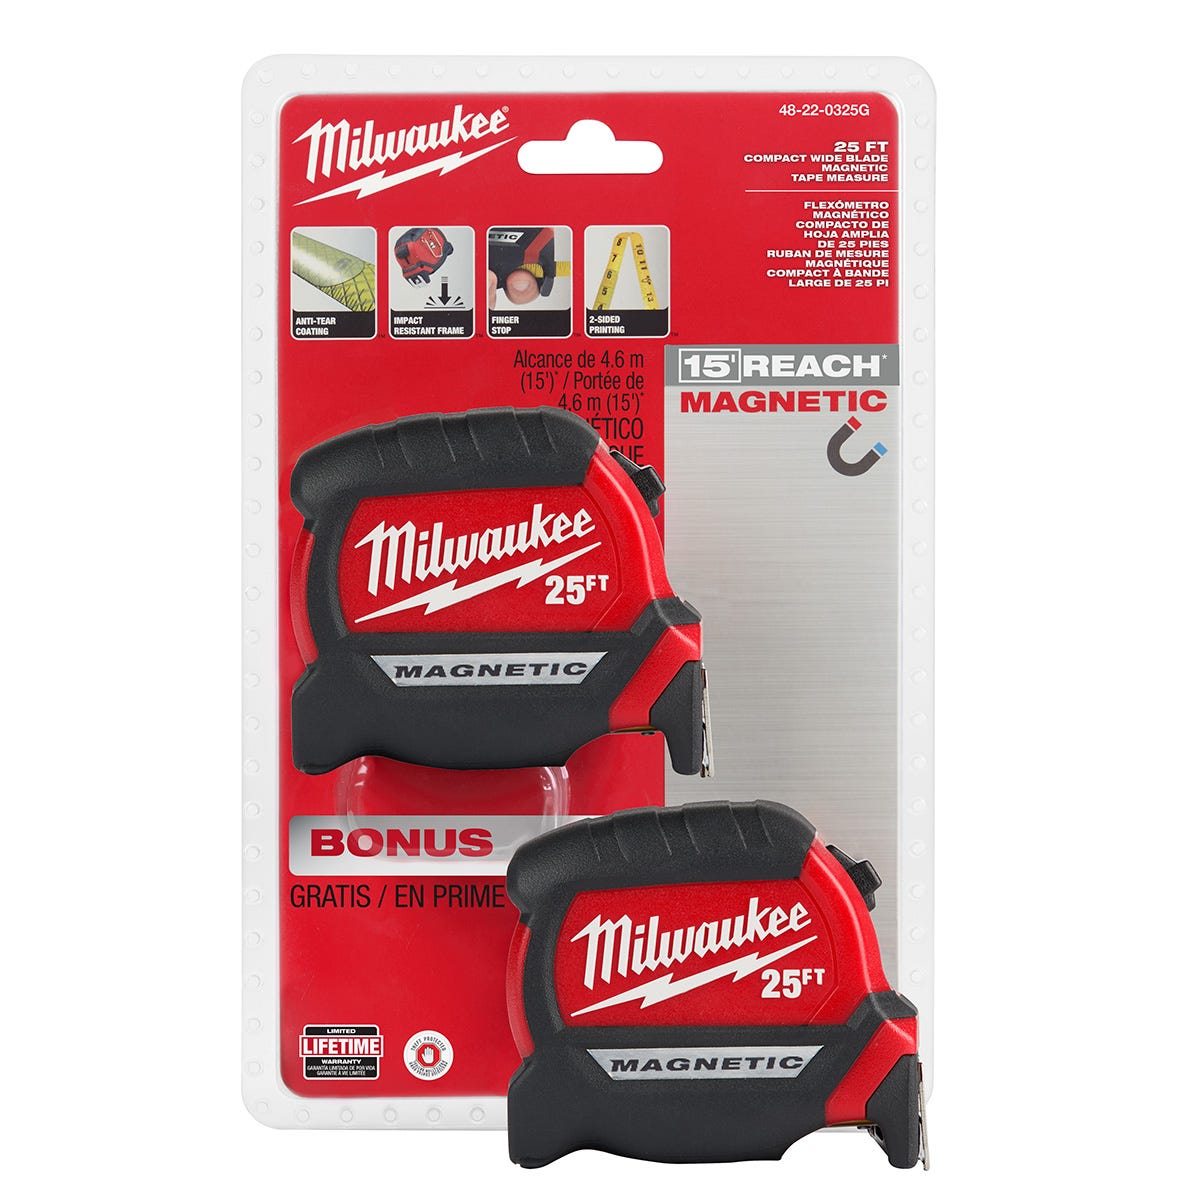 Milwaukee 48-22-0325G 25-Foot Compact Magnetic Tape Measure, 2-Pack